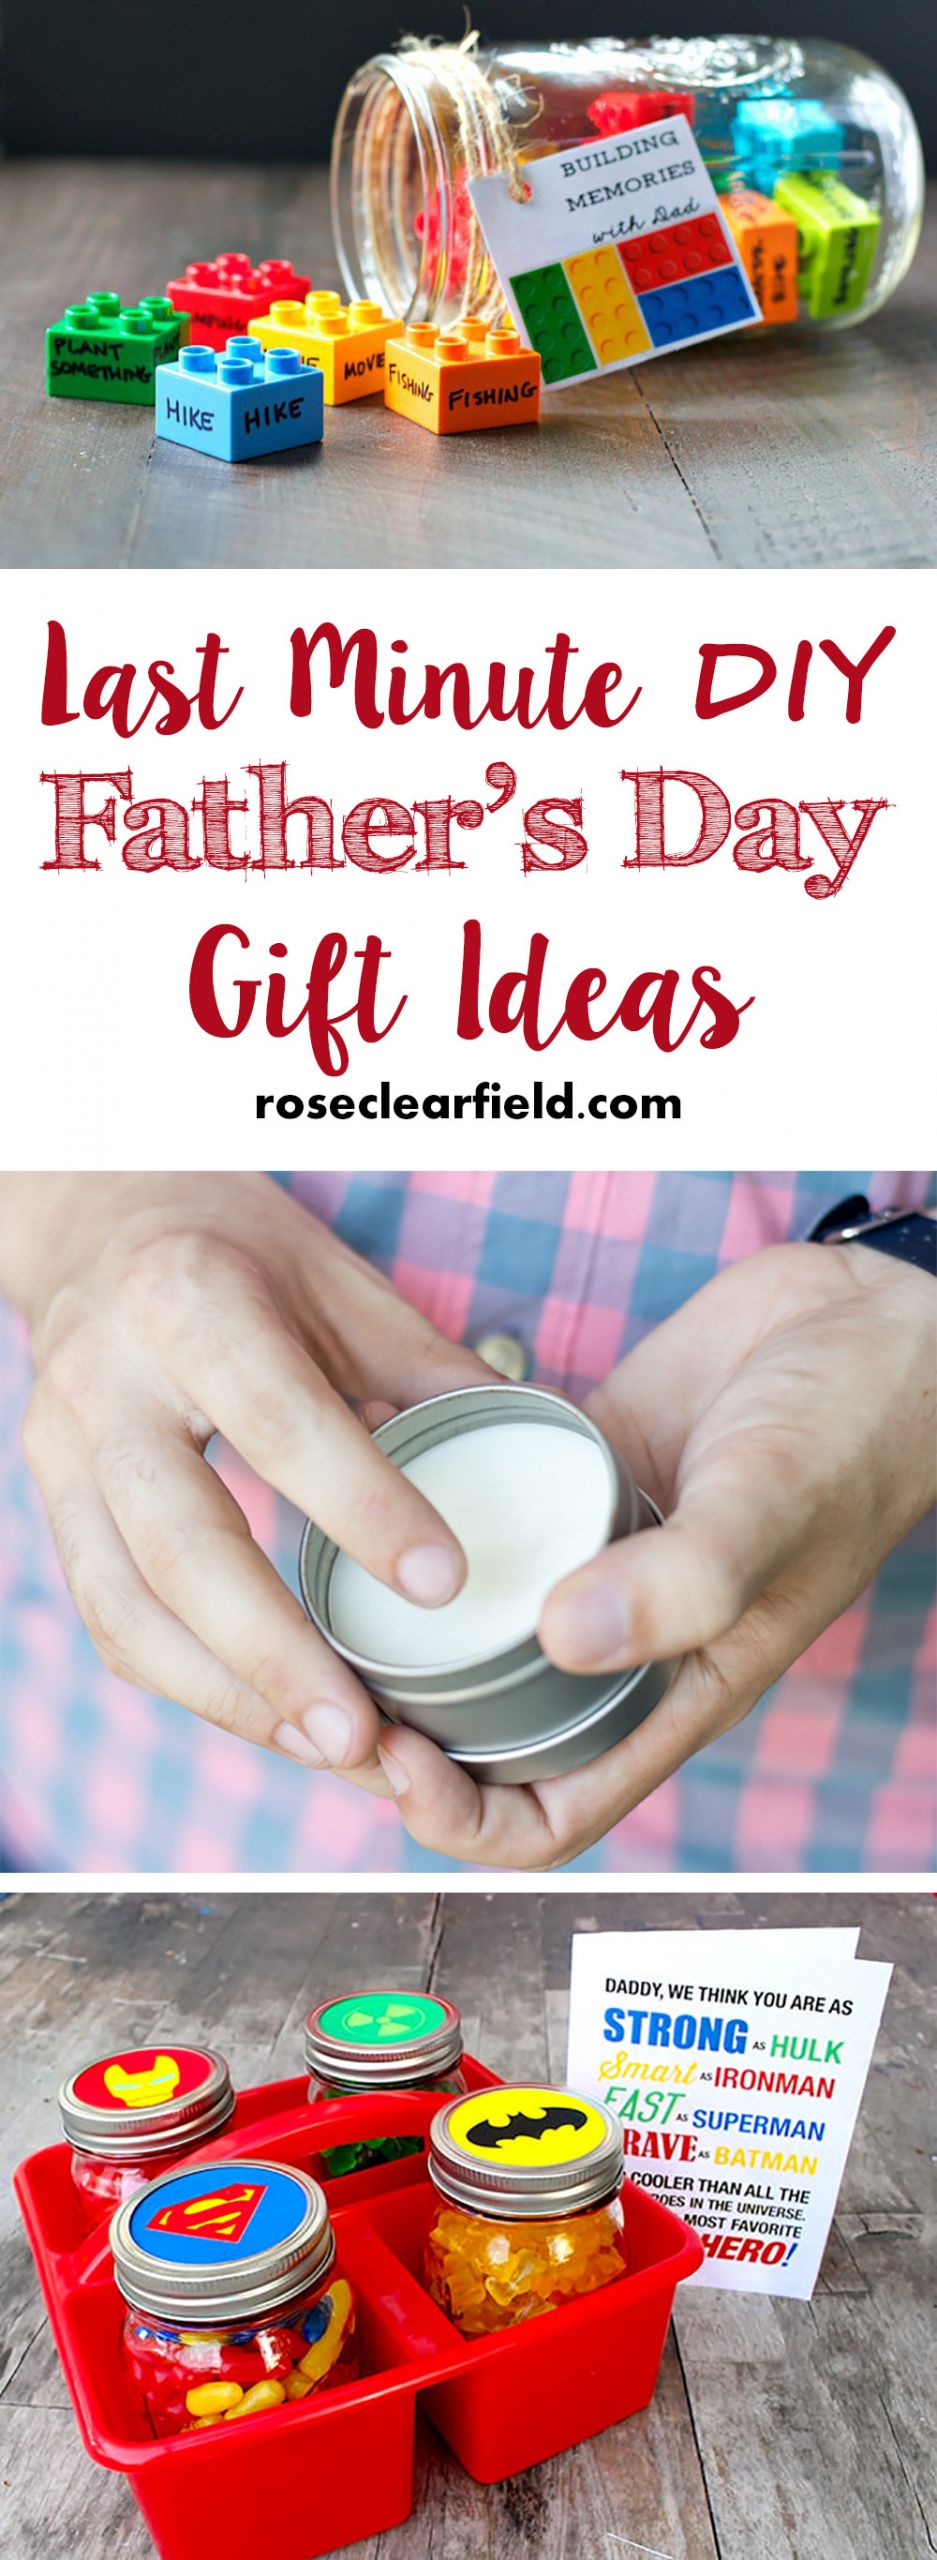 Mother'S Day Gift Ideas
 Last Minute DIY Father s Day Gift Ideas • Rose Clearfield